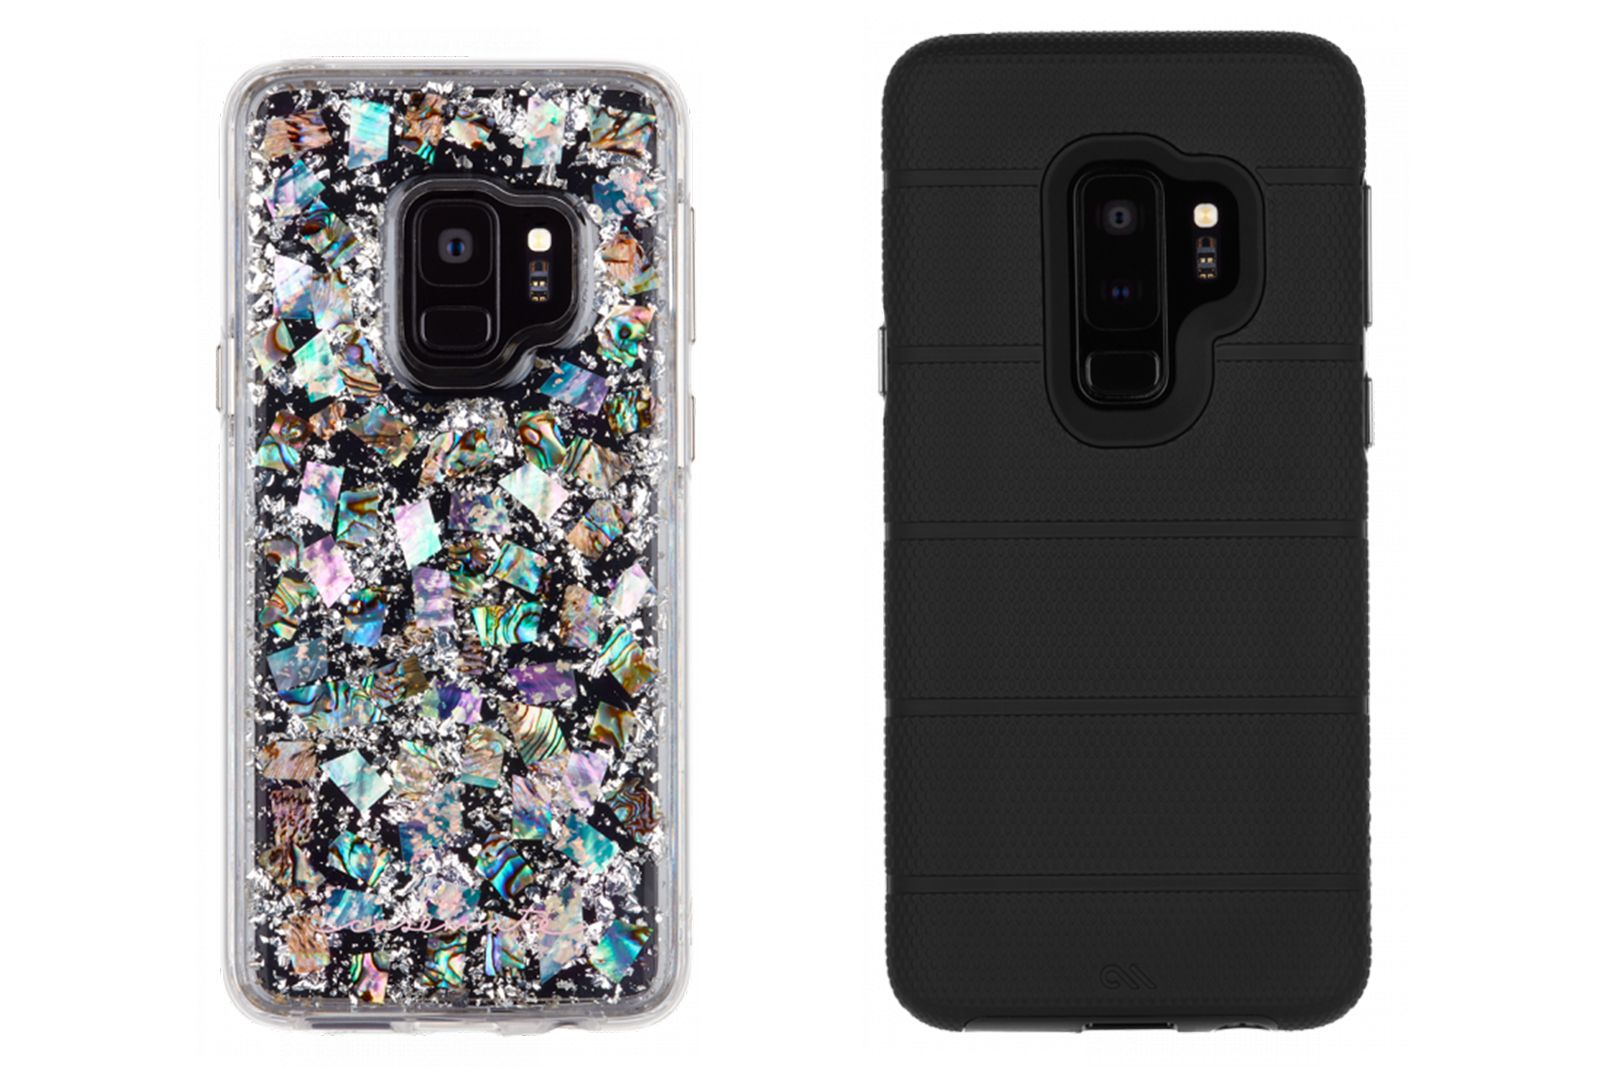 Best Samsung Galaxy S9 and S9 cases Protect your new Galaxy smartphone image 20